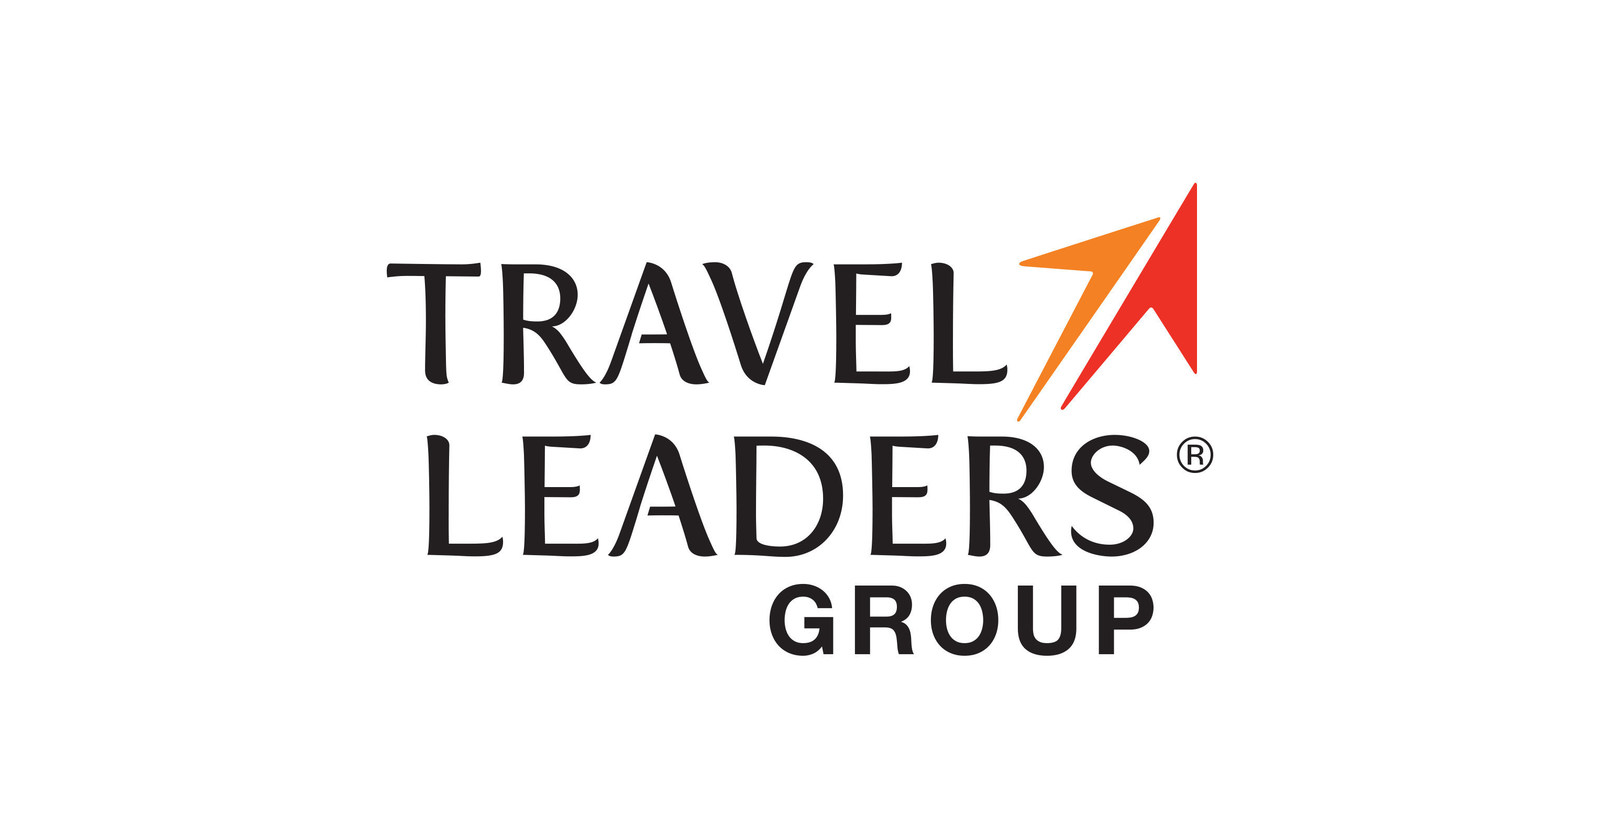 travel leaders agents